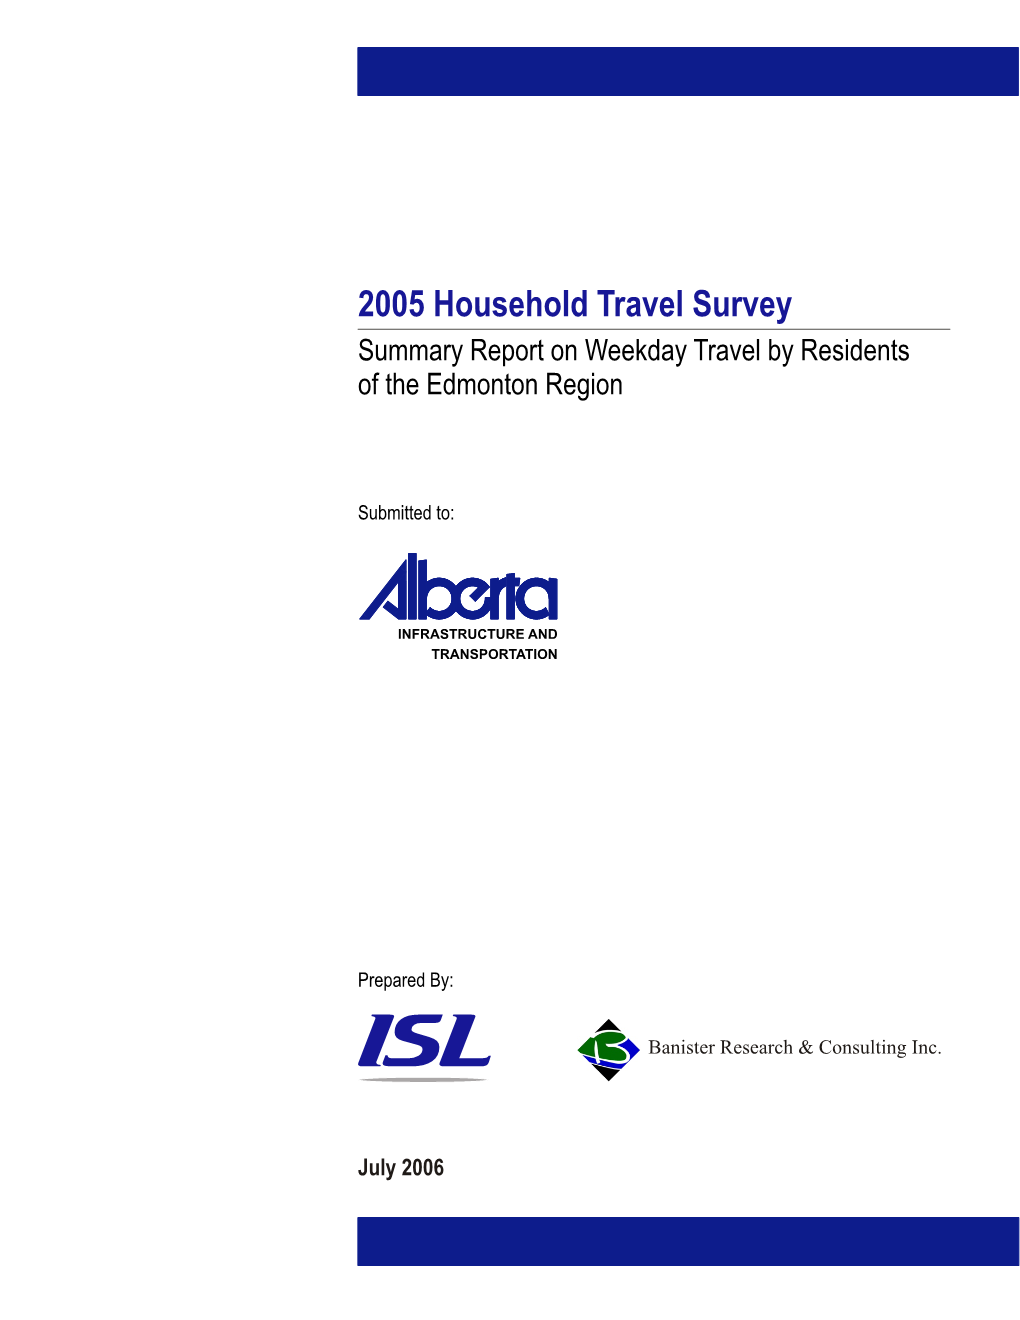 2005 Household Travel Survey Summary Report on Weekday Travel by Residents of the Edmonton Region